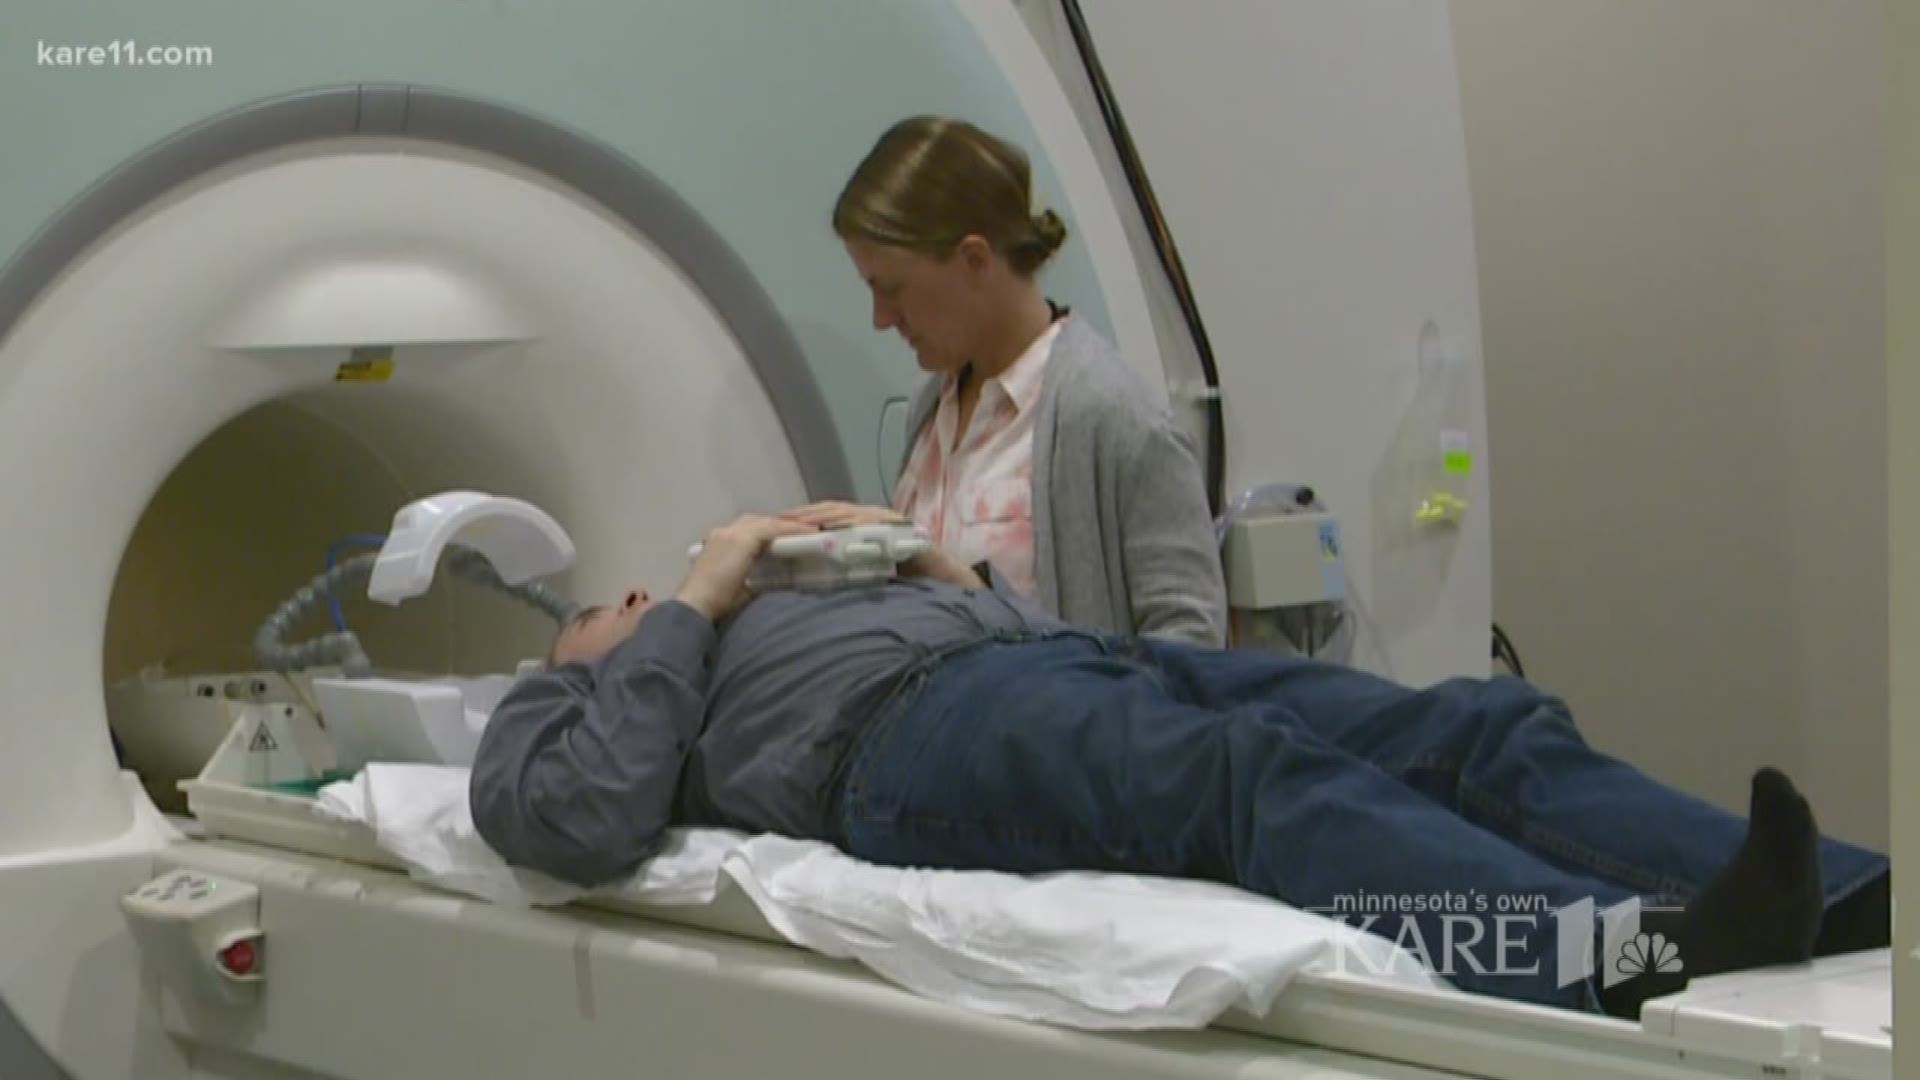 Dr. Terpstra is conducting innovative research to analyze how brain connections change at different ages. https://kare11.tv/2KdVpXw